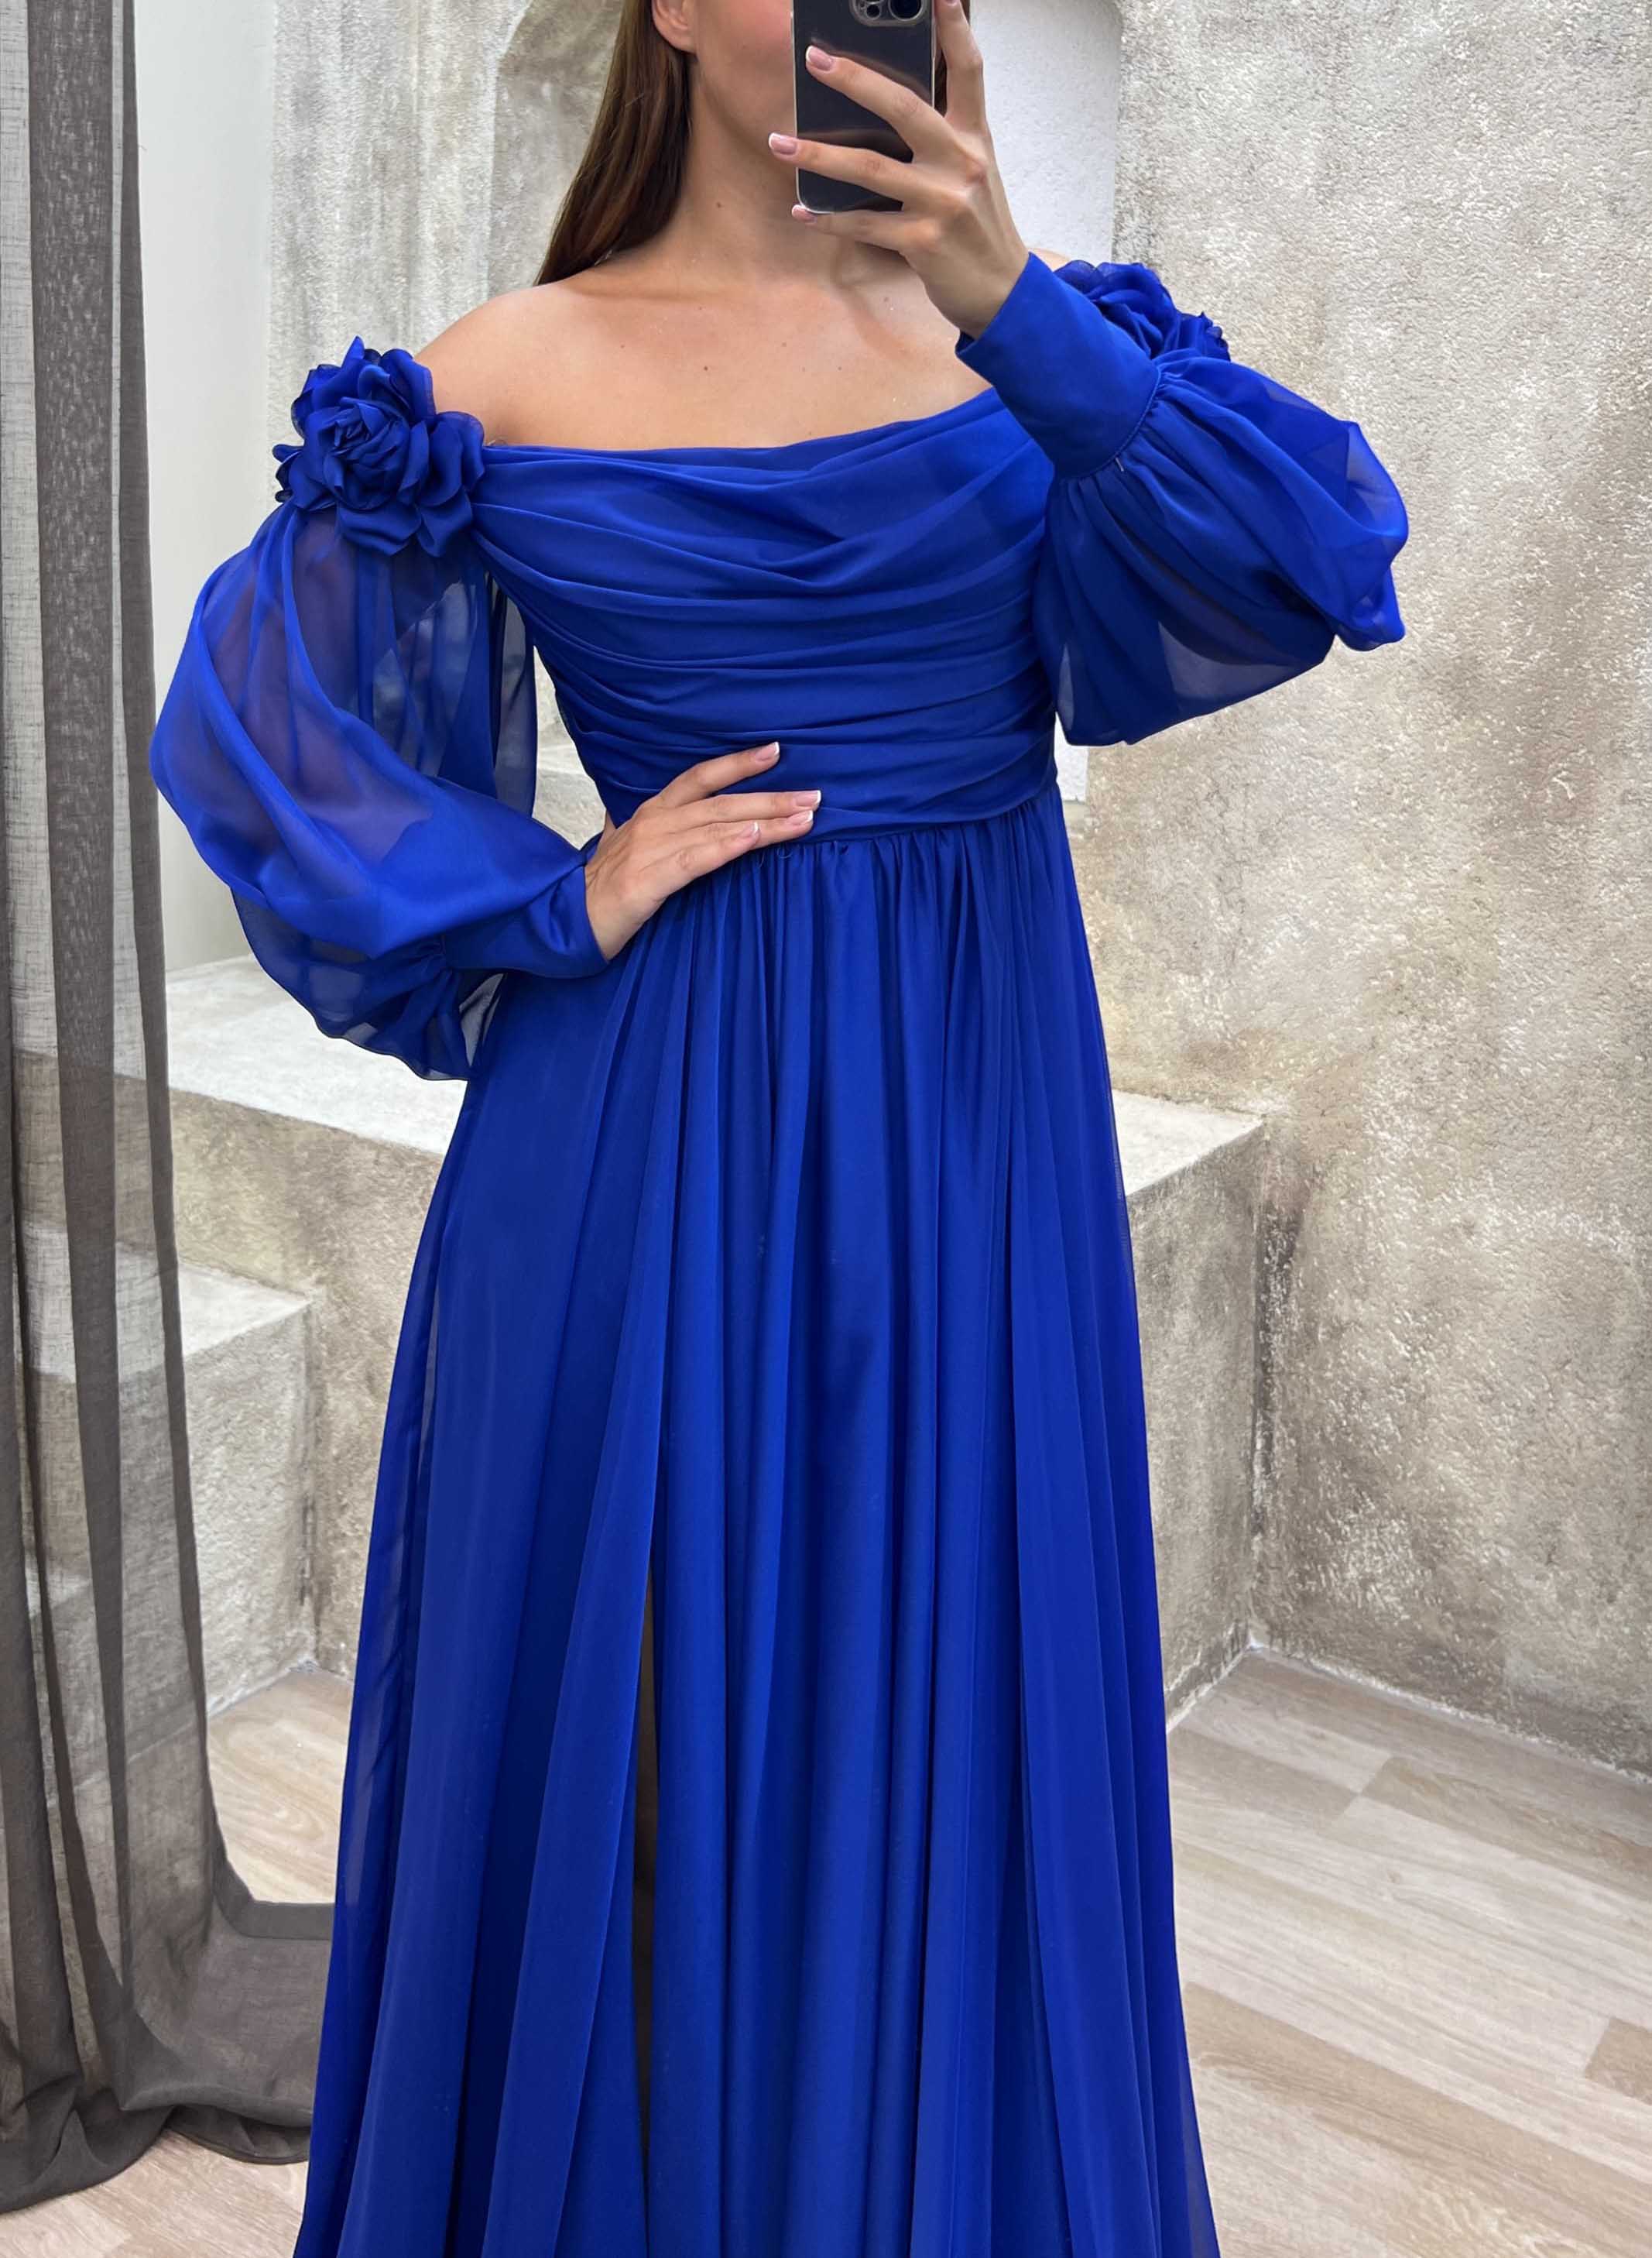 Off-The-Shoulder Long Sleeves Flowers Evening Dresses With Chiffon